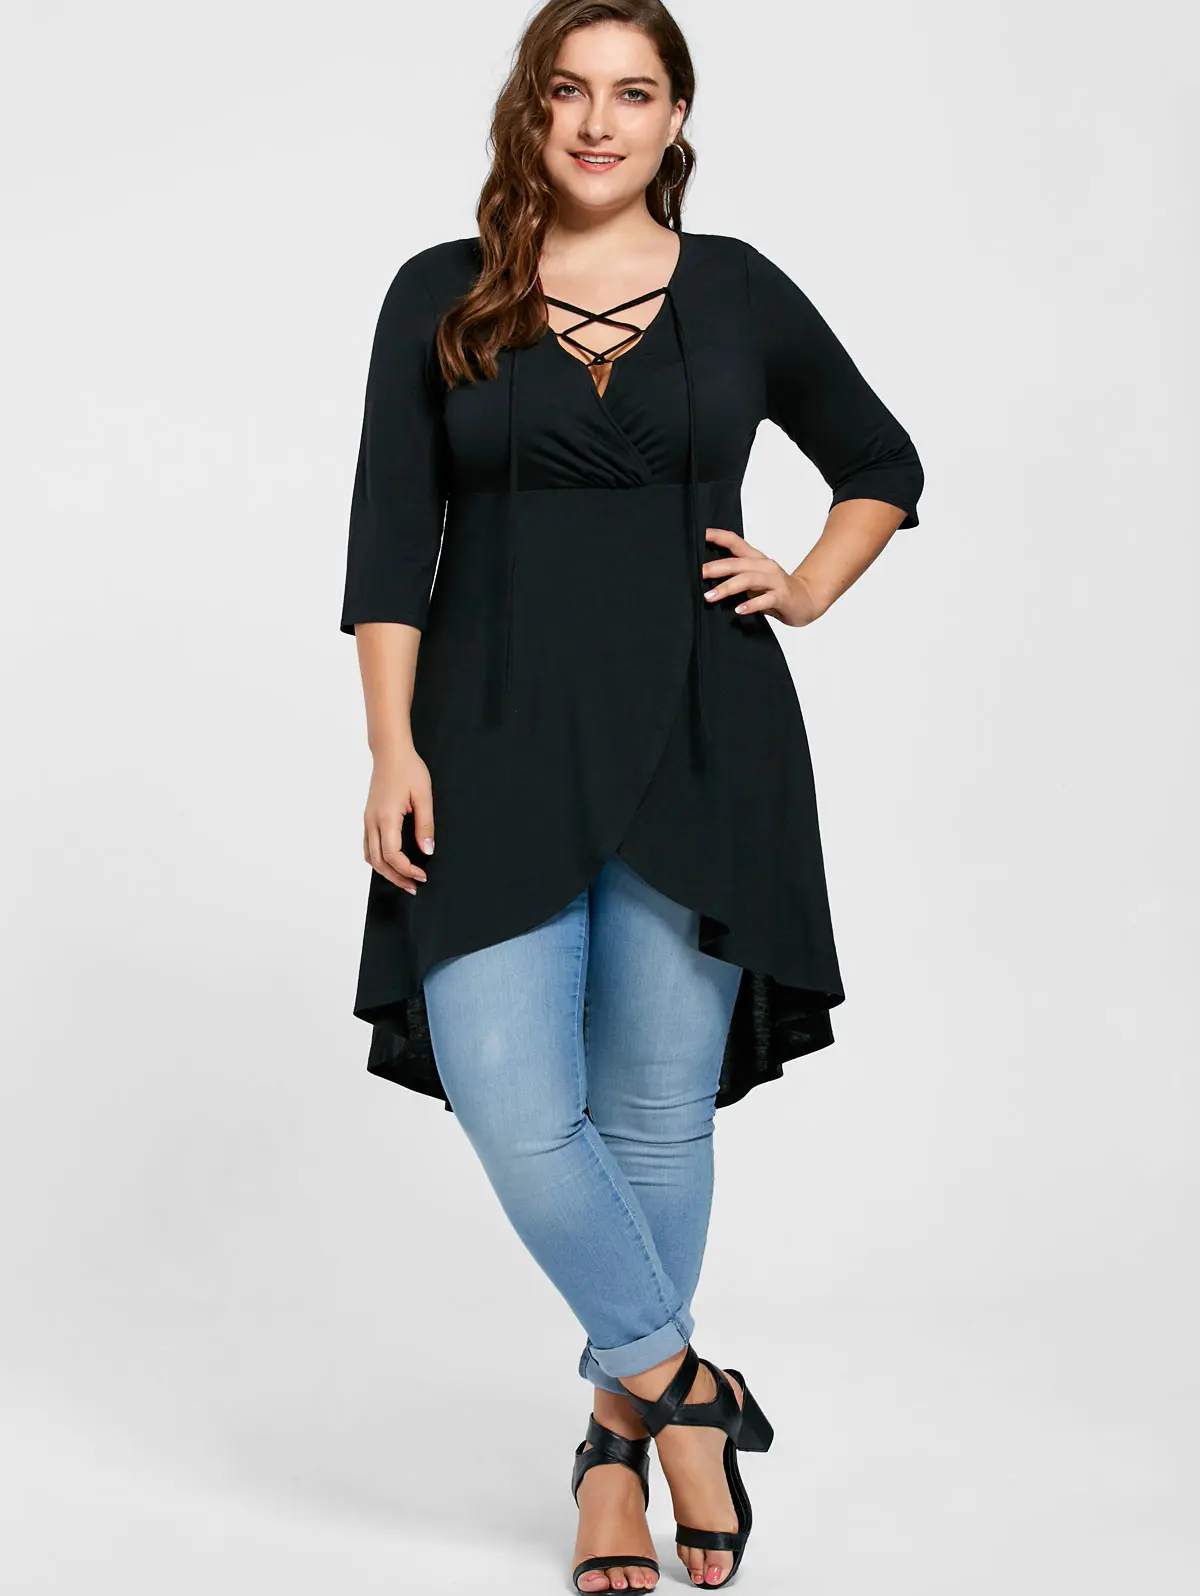 

Wipalo Plus Size 5XL Lace Up High Low Hem Overlap Top V-Neck Women Three Quarter Sleeve Asymmetrical Tunic Casual Solid T-Shirt